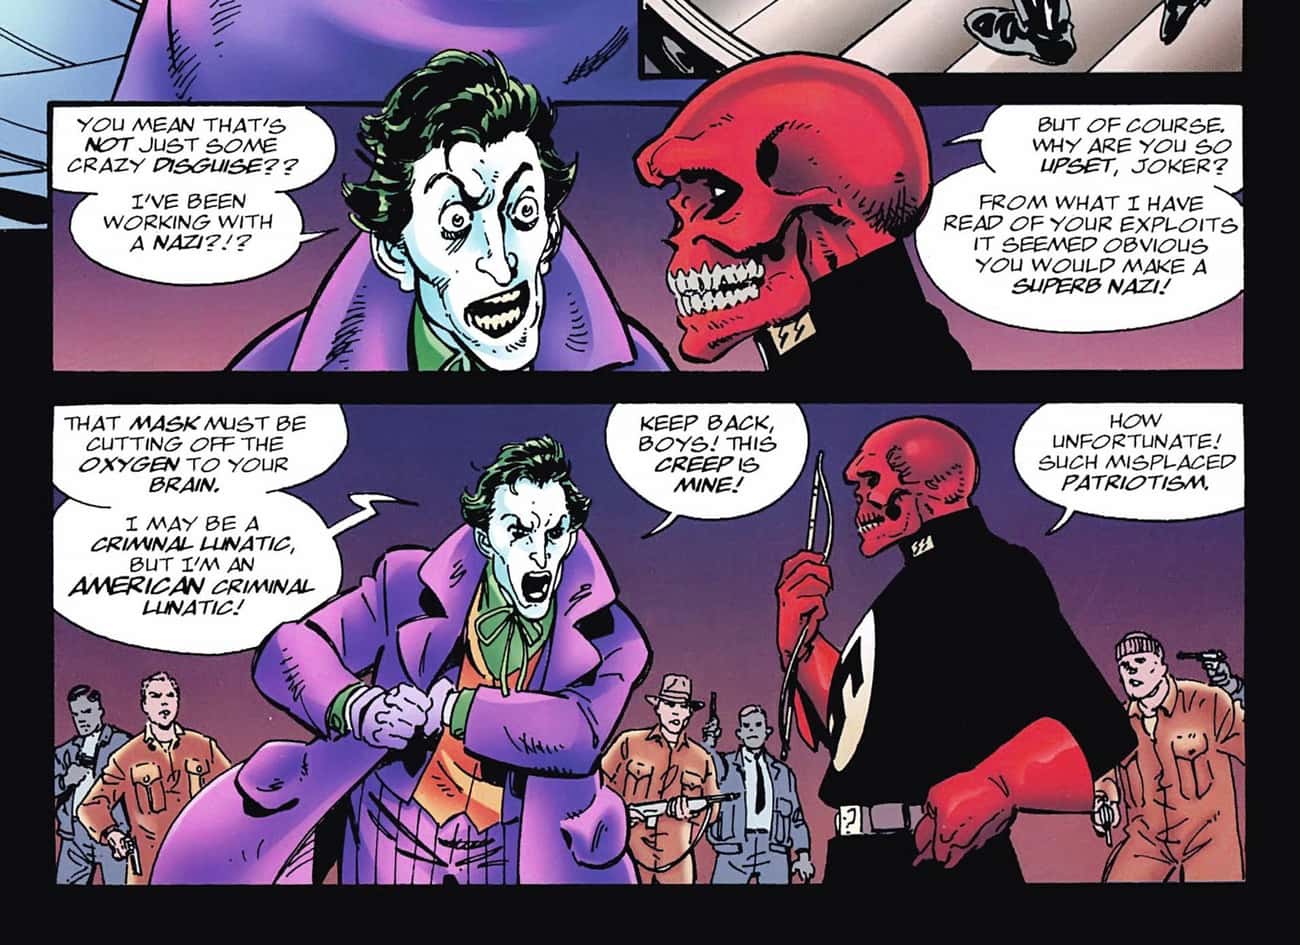 Even The Joker Isn’t Down With Nazism